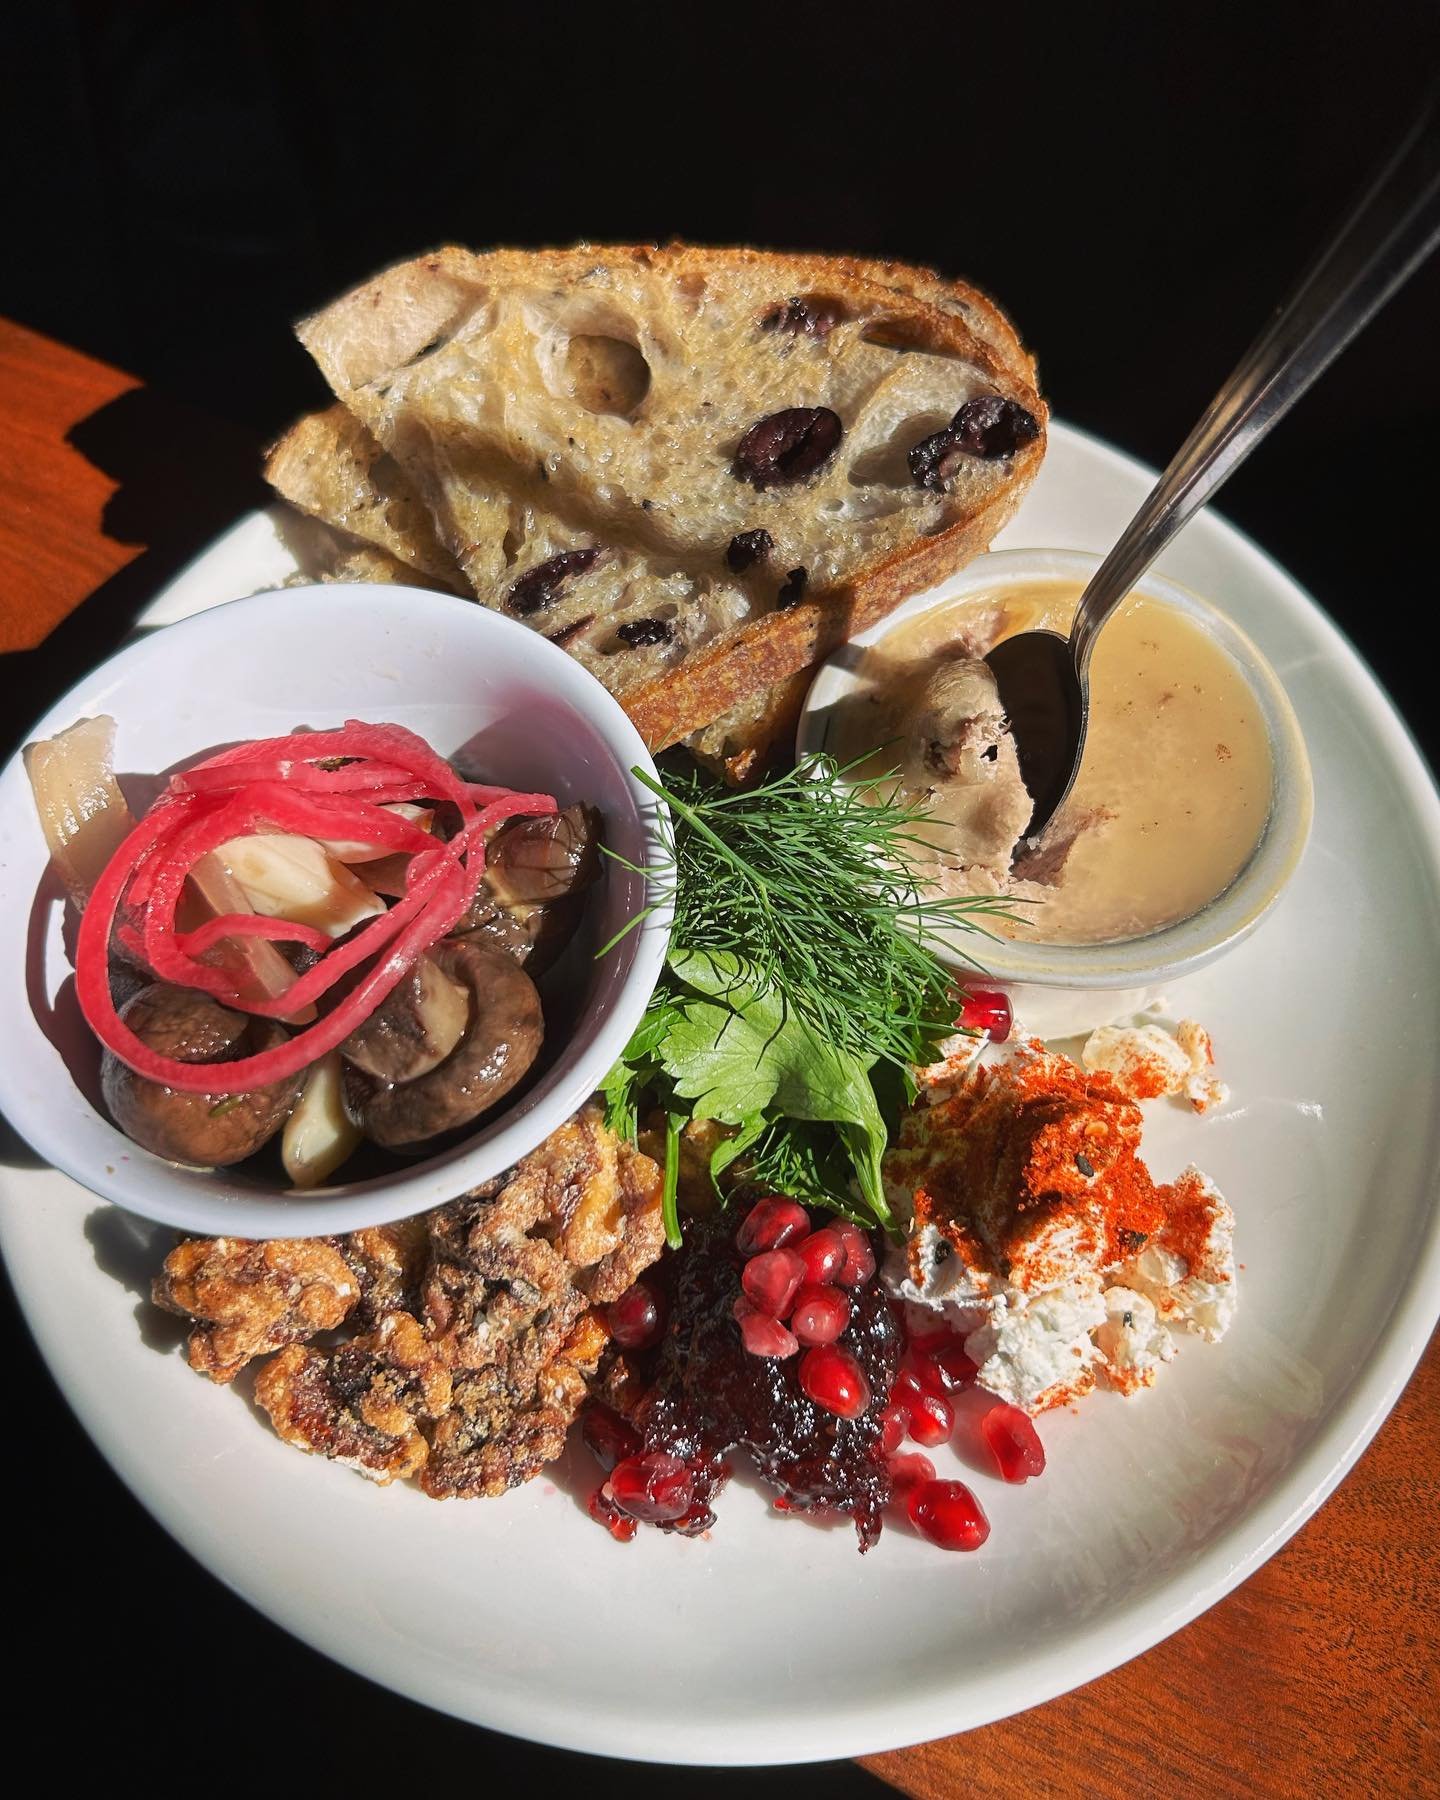 For this week&rsquo;s special we&rsquo;re taking you on a GREEK PICNIC with @wheatfieldsbkry kalamata bread, local lamb breast rilette, sheep&rsquo;s milk feta, pickled mushrooms a la Greque, pomegranate jam and candied walnuts 😻😻😻